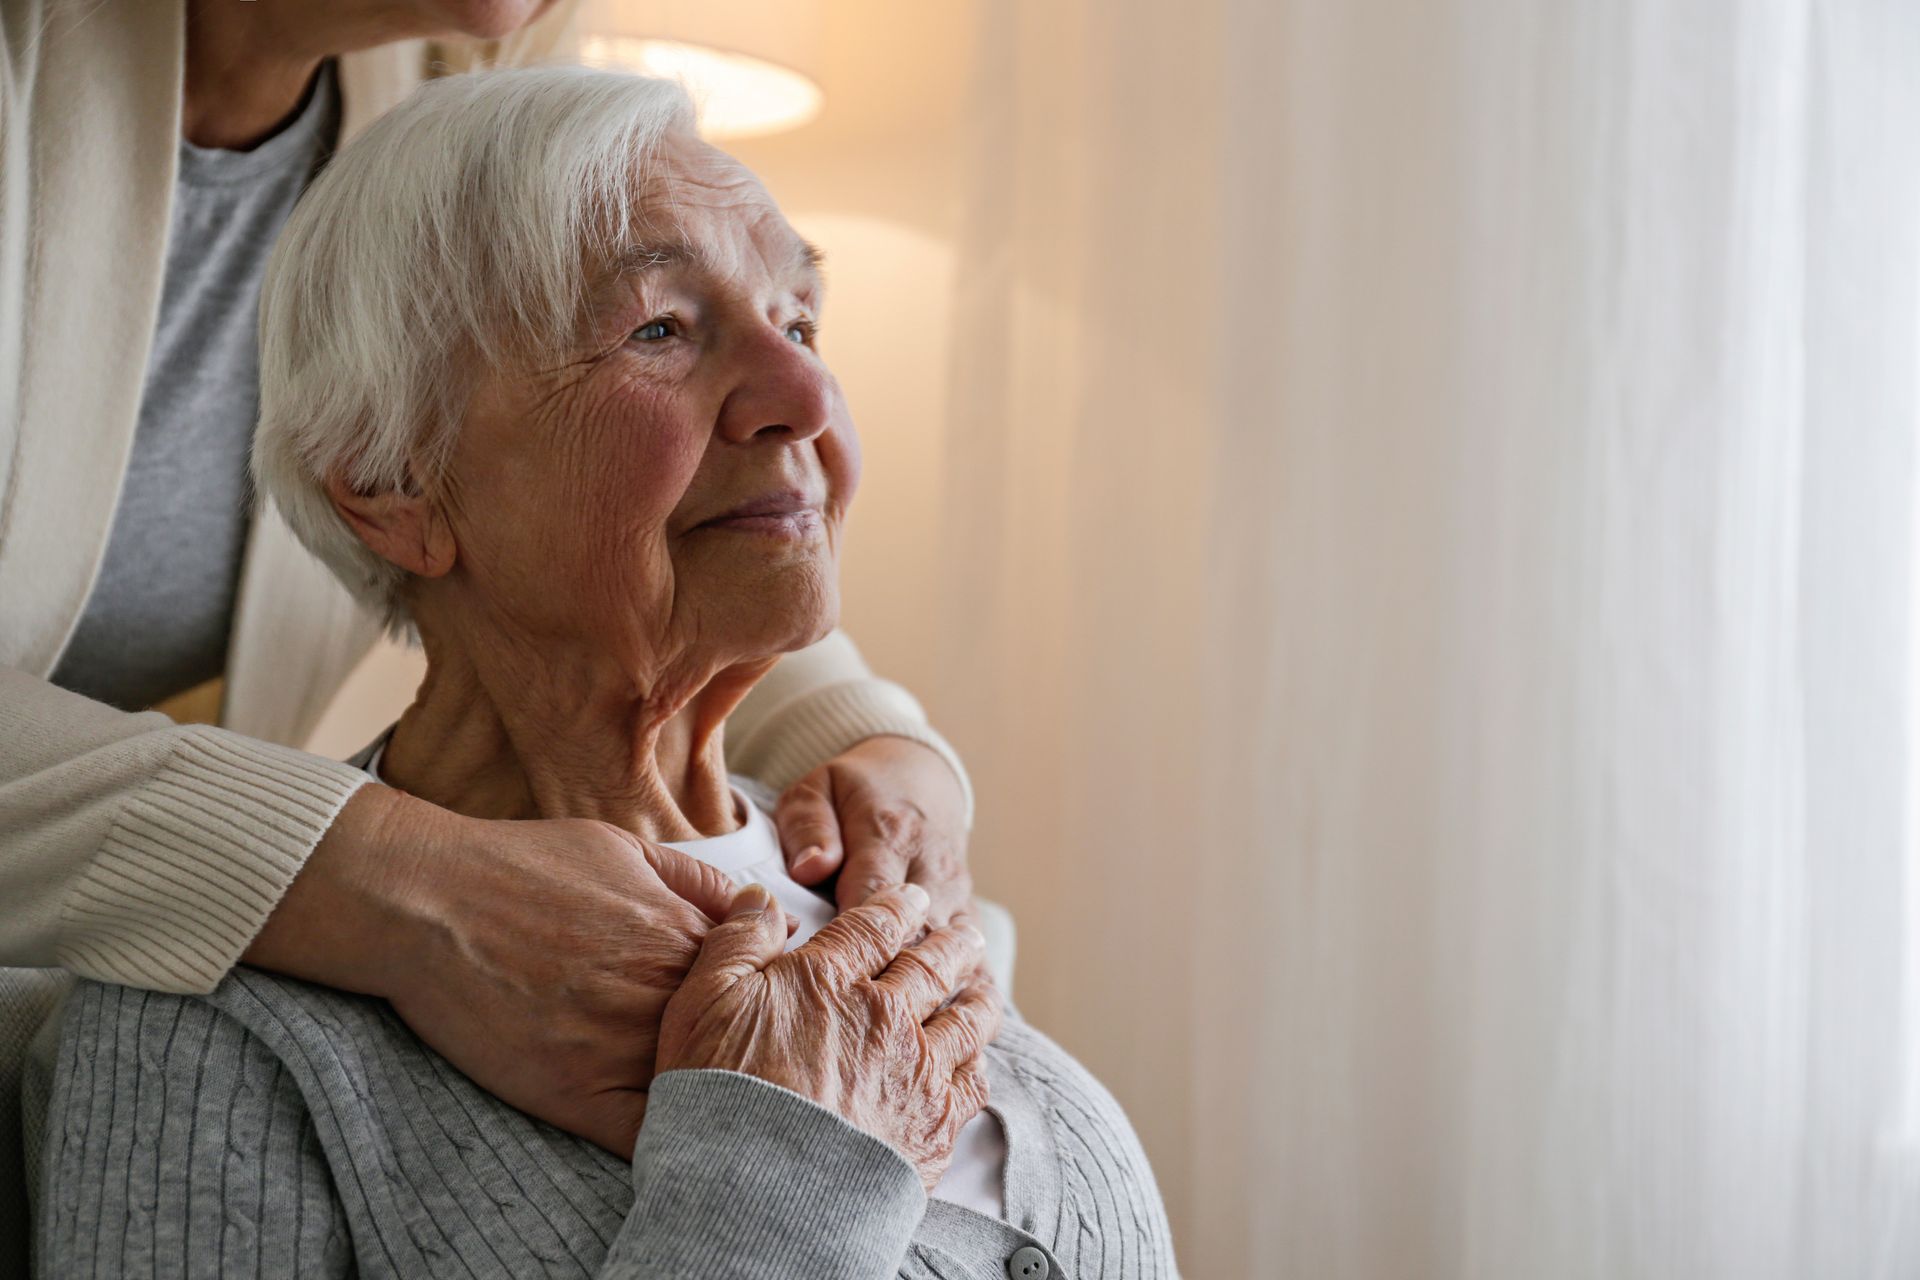 A caregiver places her hands on the shoulders of a person with dementia to offer comfort.
